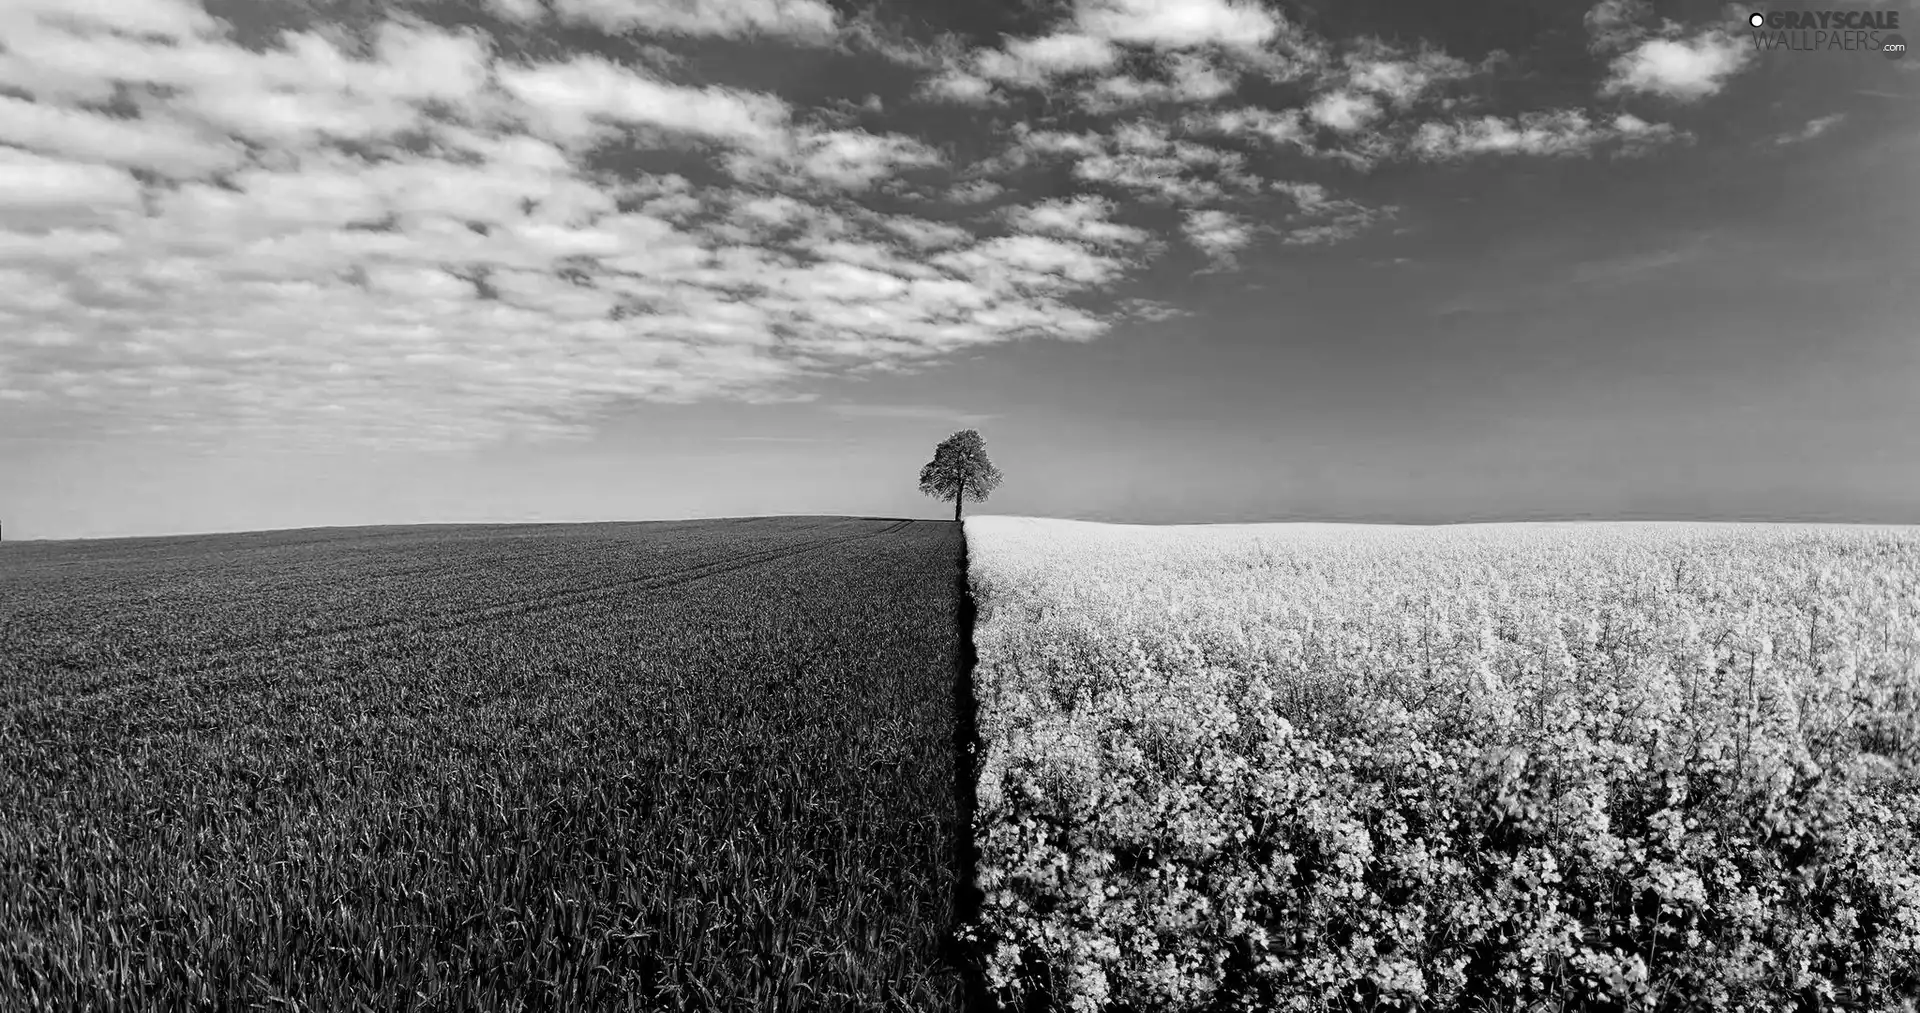 field, trees, Sky, cultivated